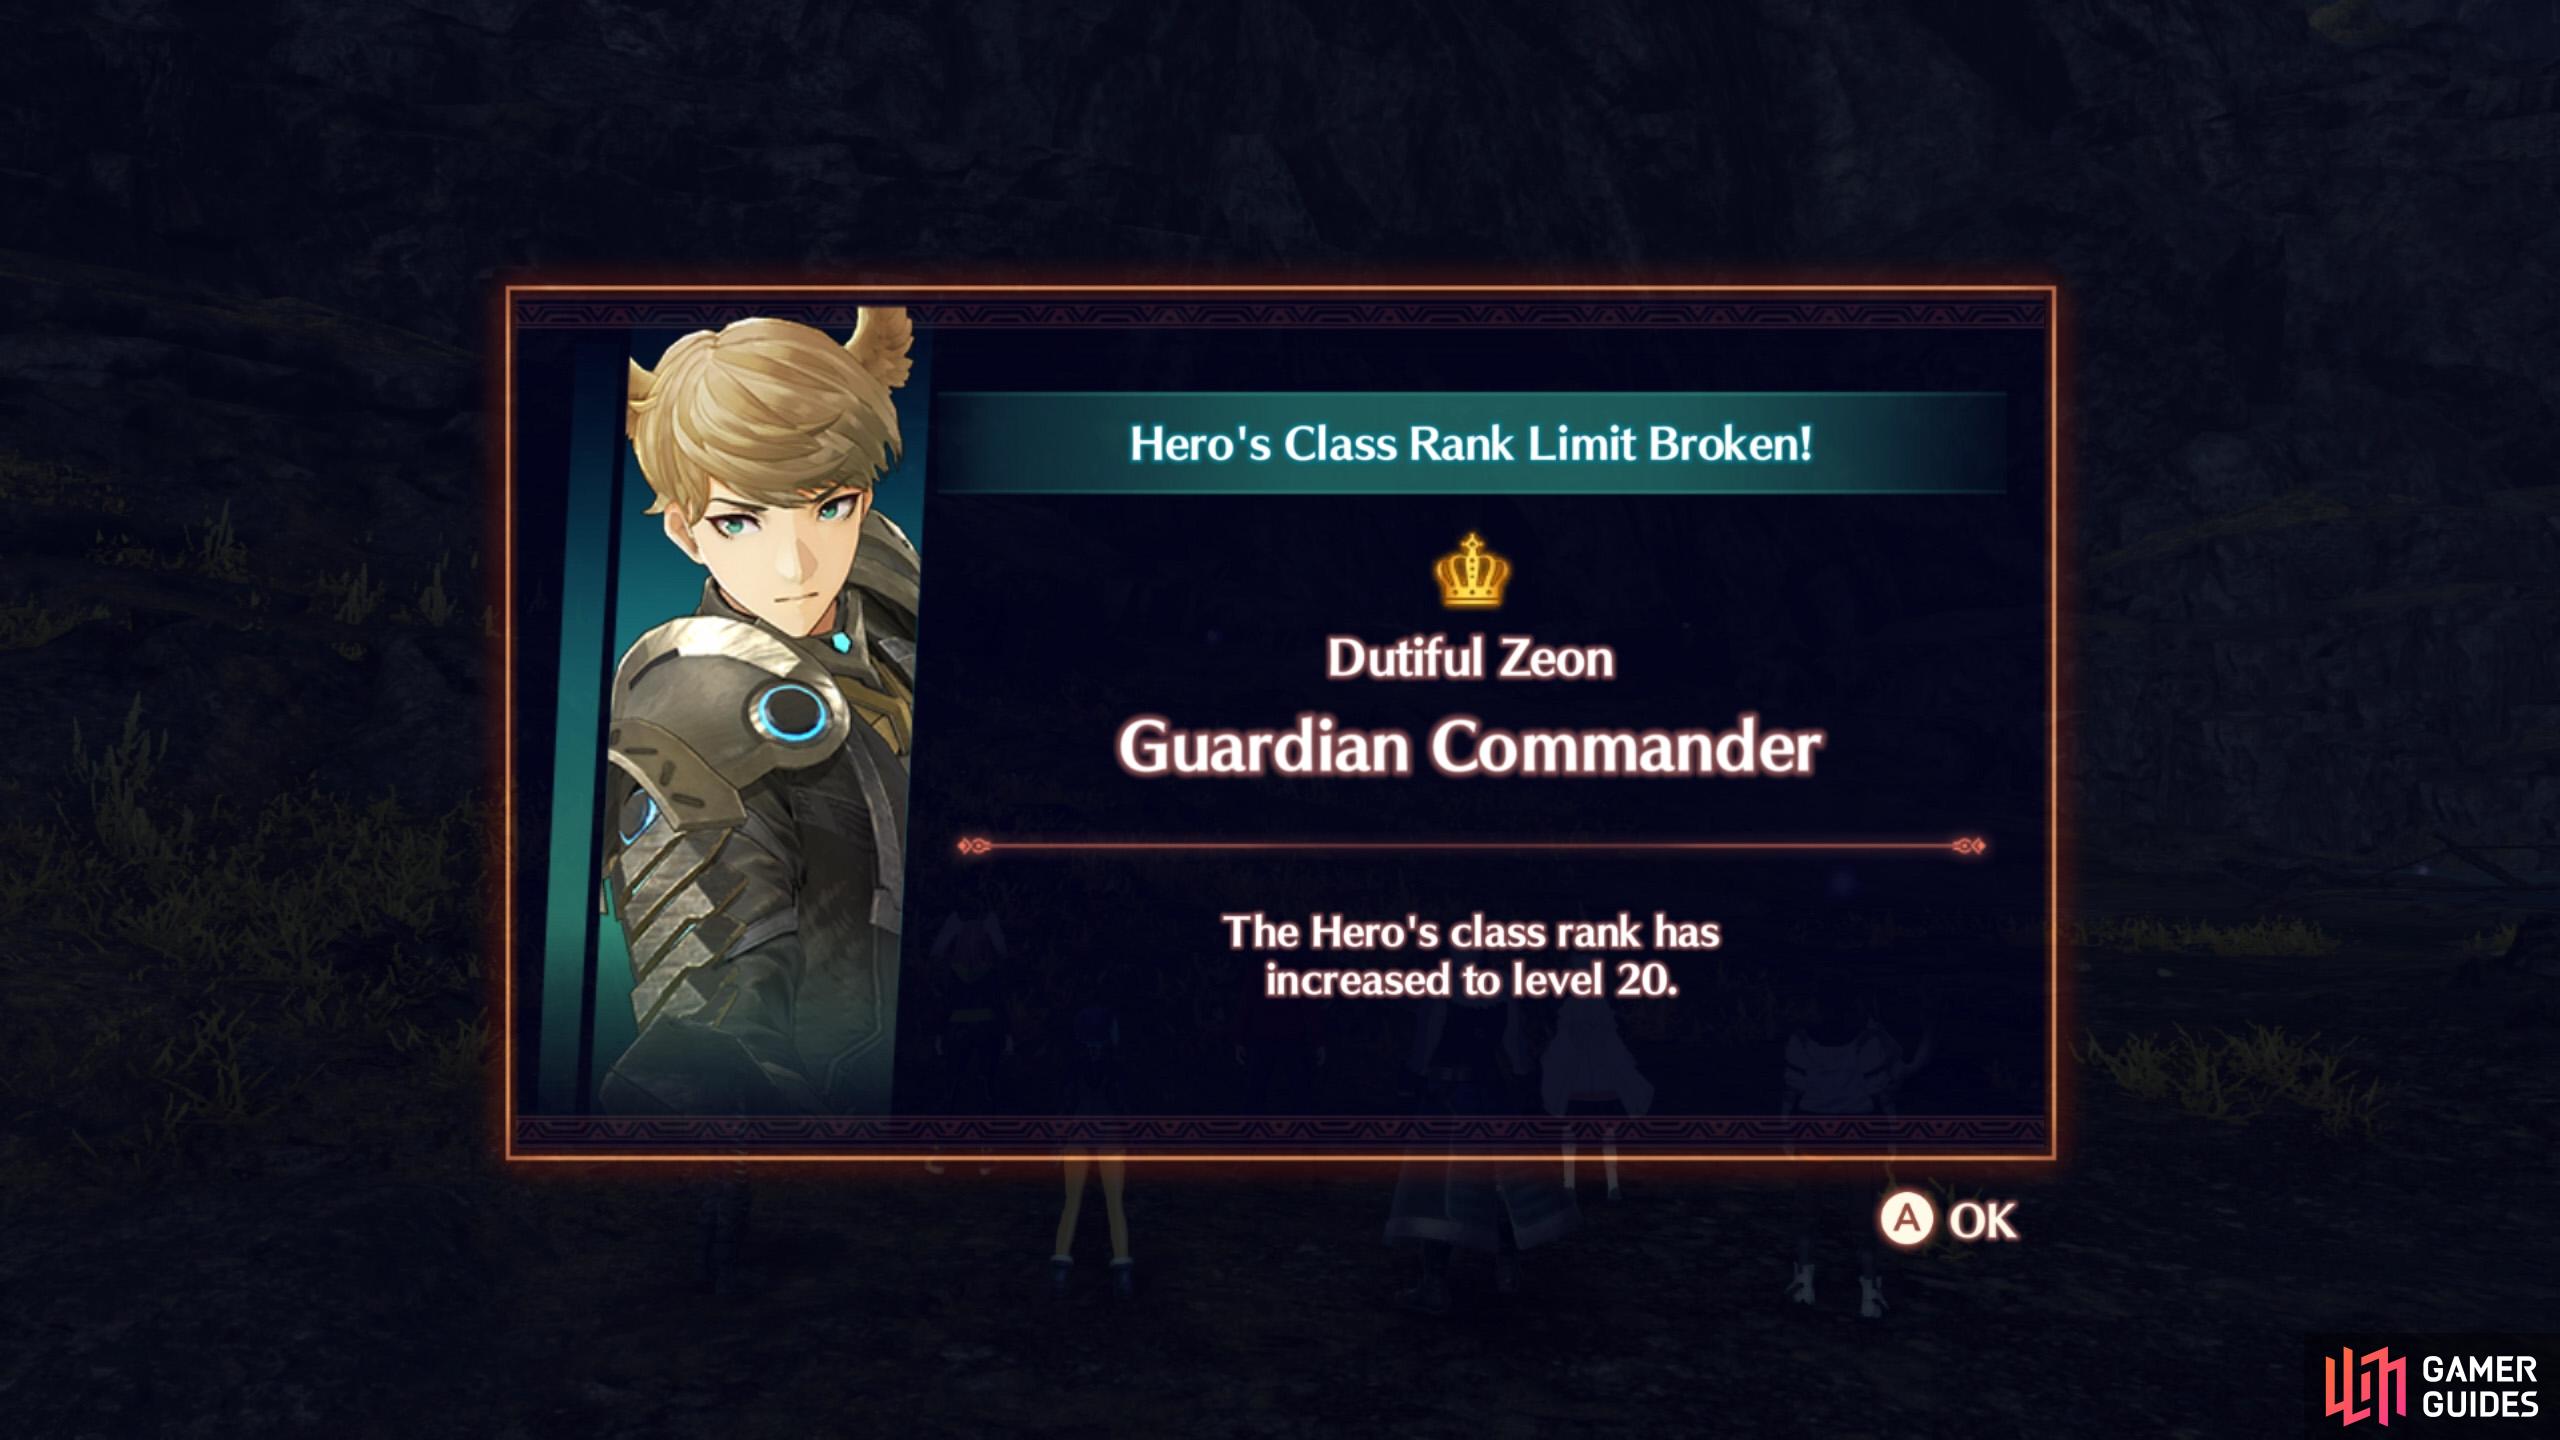 Completing this quest will unlock Rank 20 for Guardian Commander class.